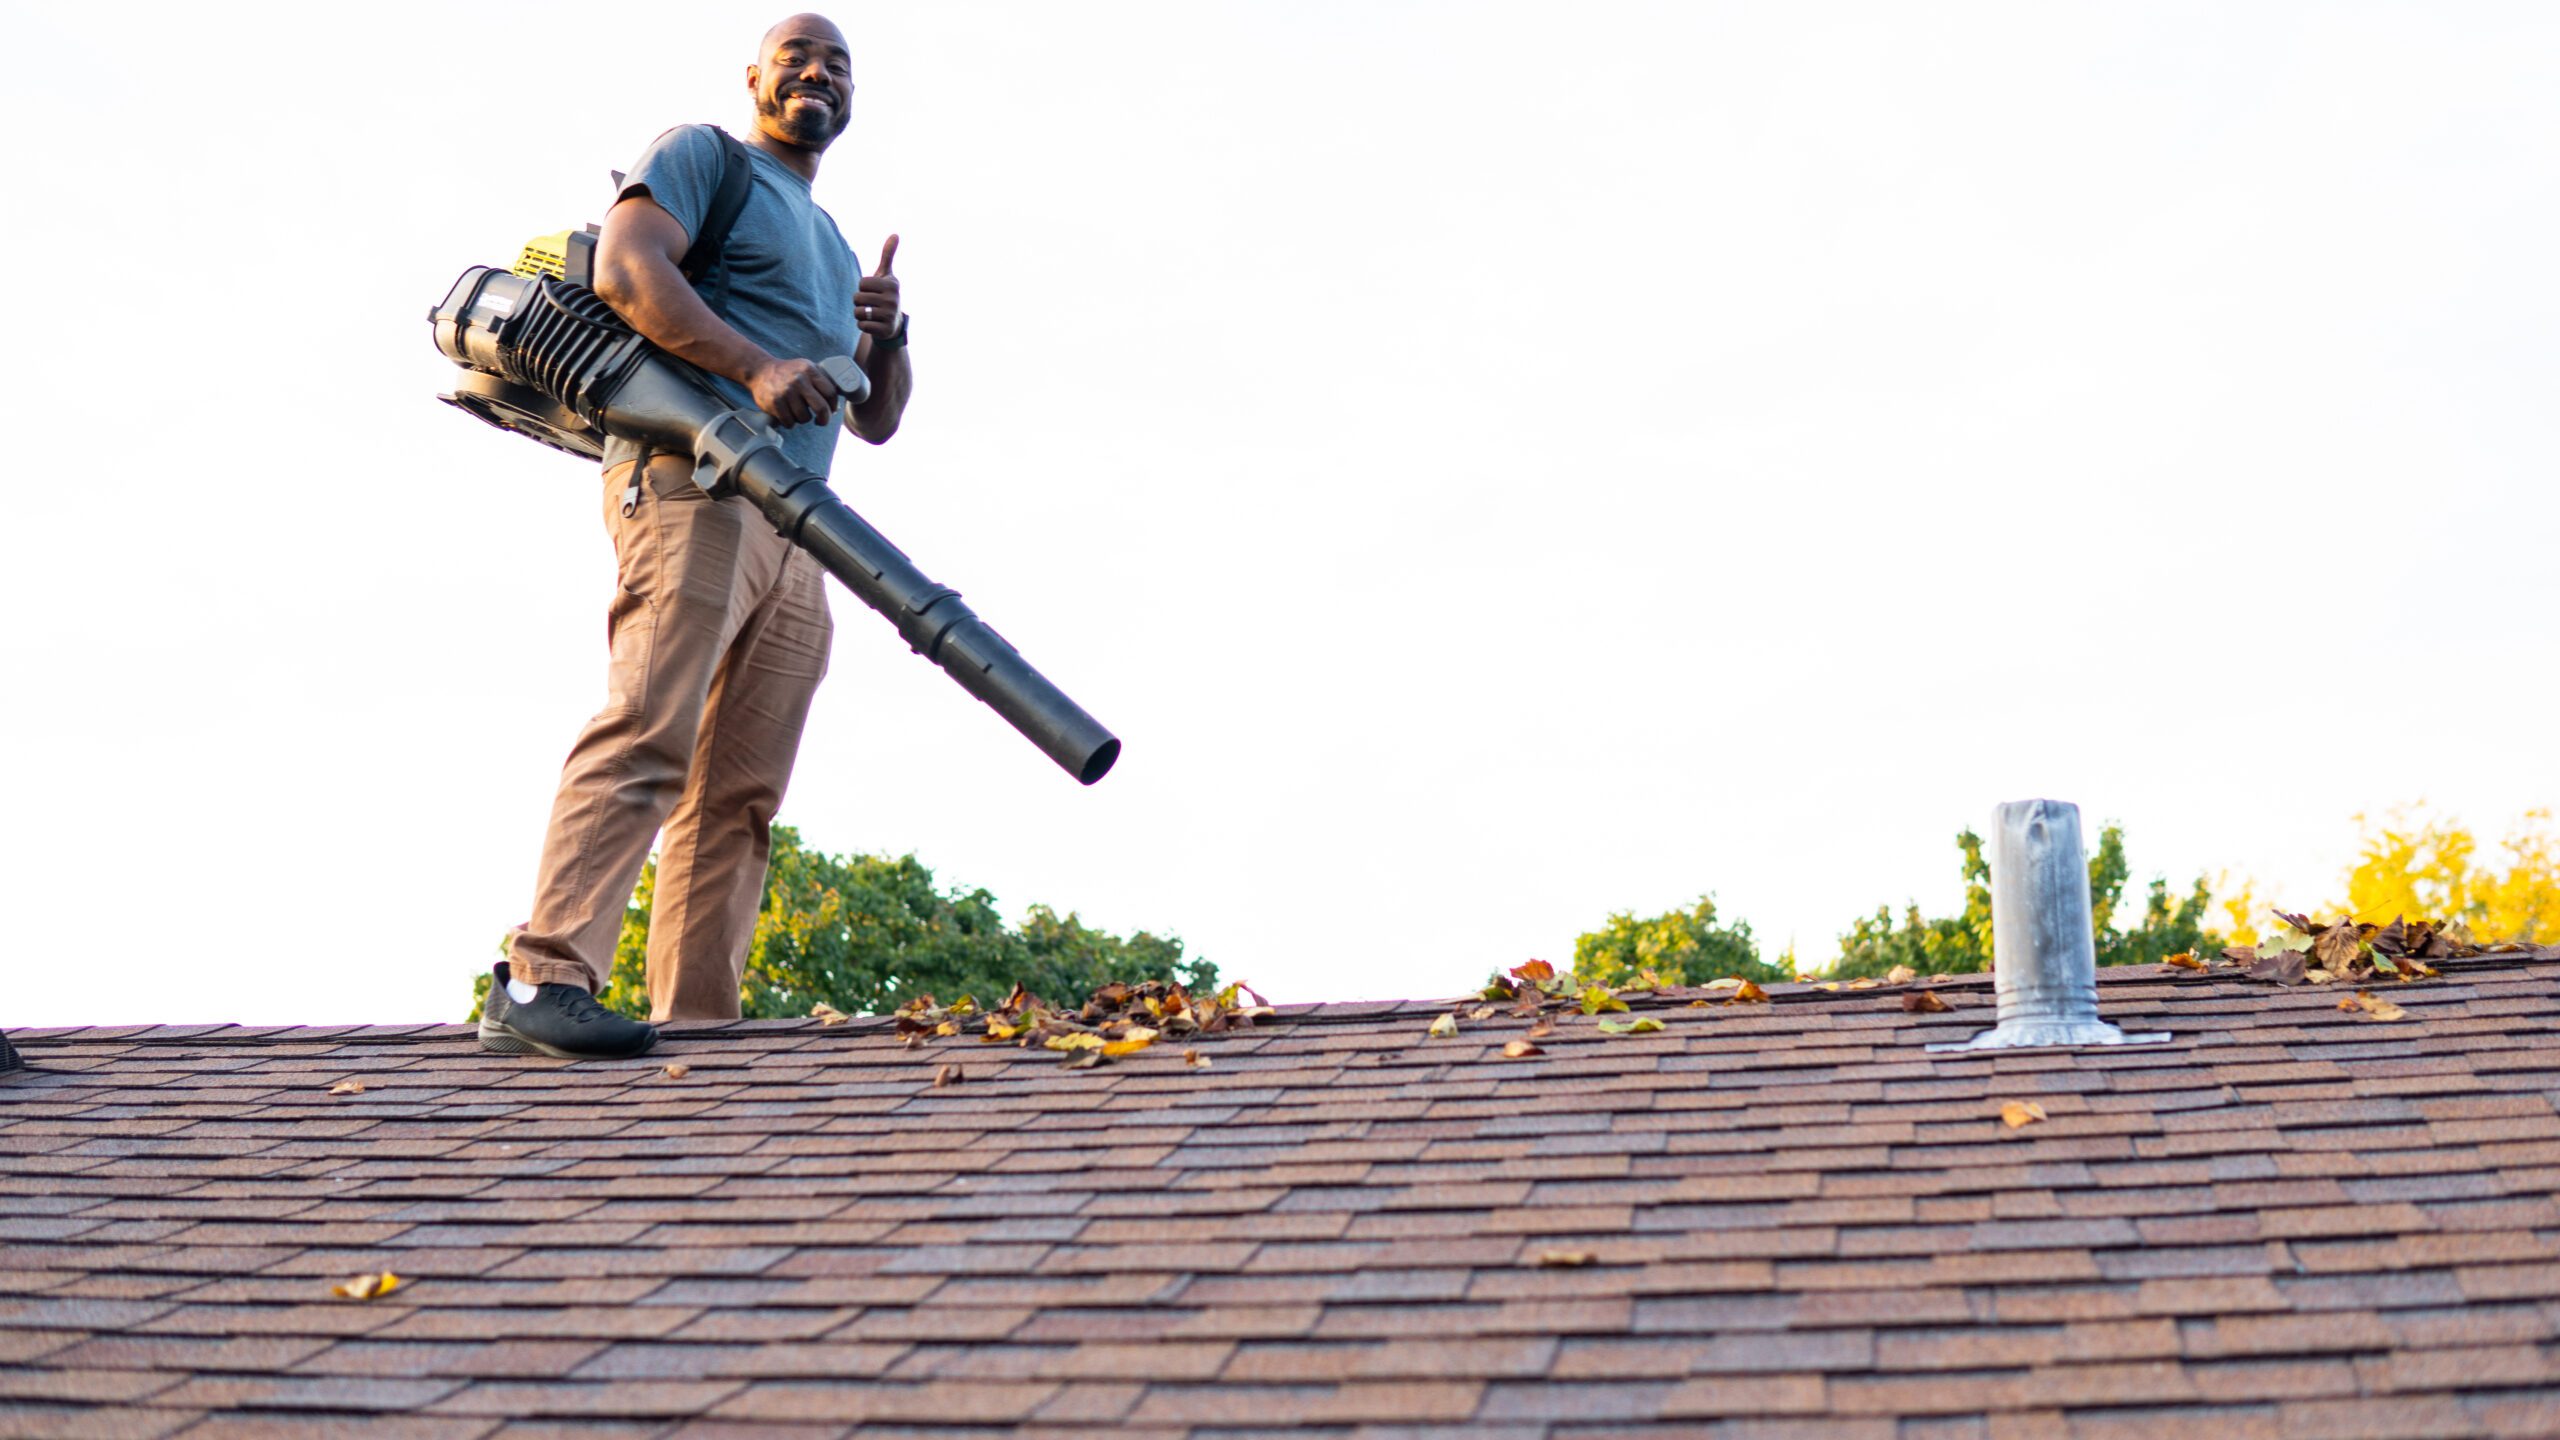 Professional on a roof cleaning gutters with his leaf blower.